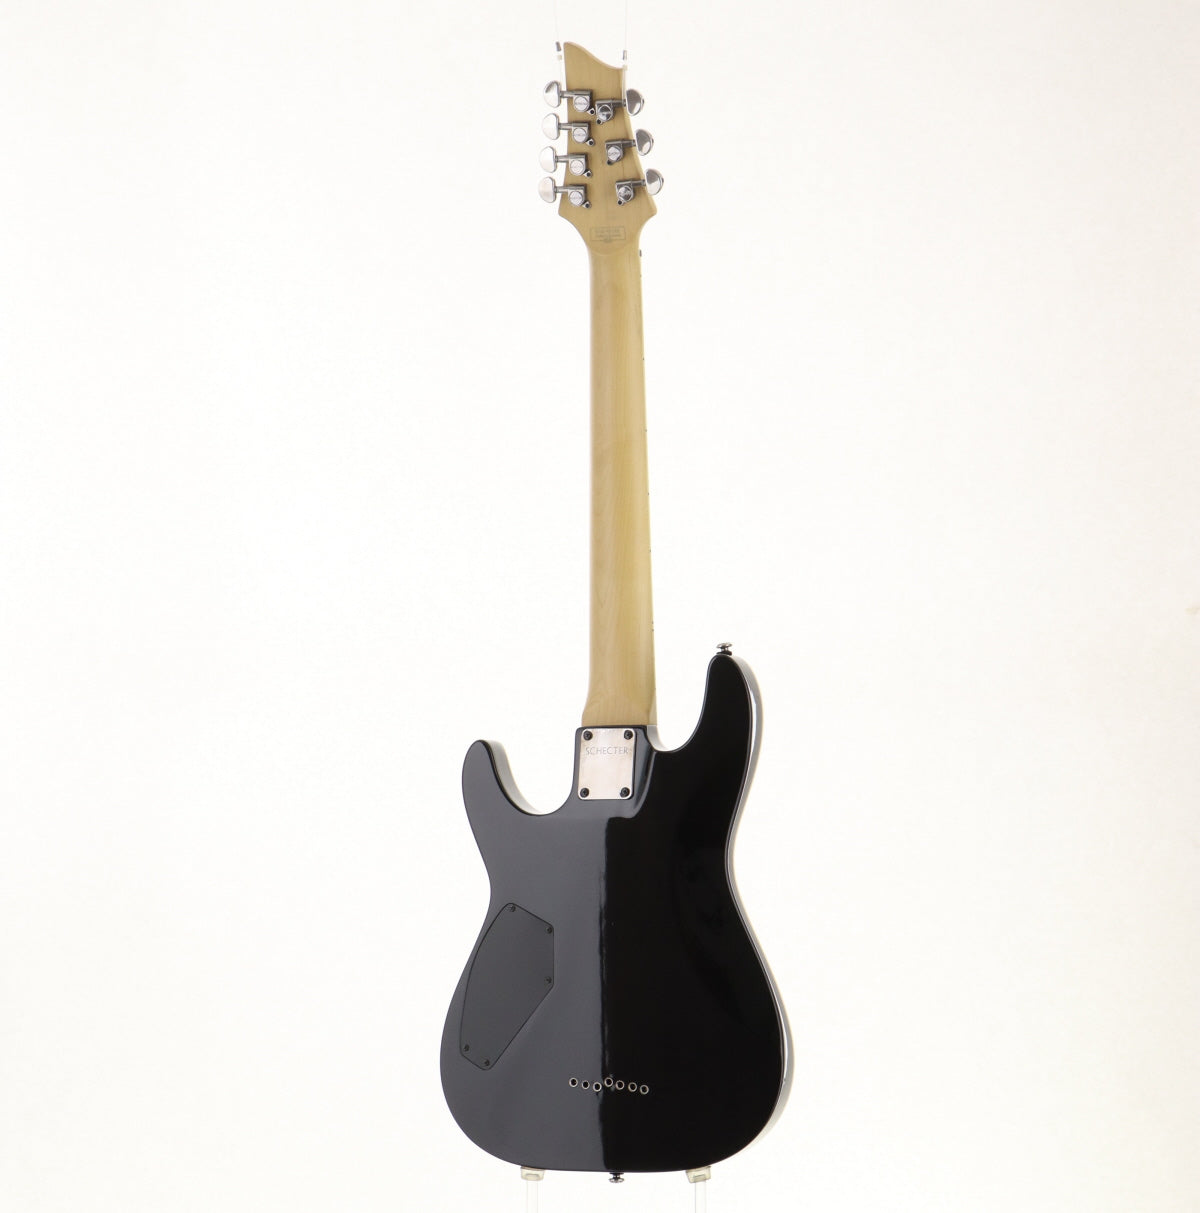 [SN N10110193] USED SCHECTER / Diamond Series Omen Extreme-7 / AD-OM-EXT-7 [06]